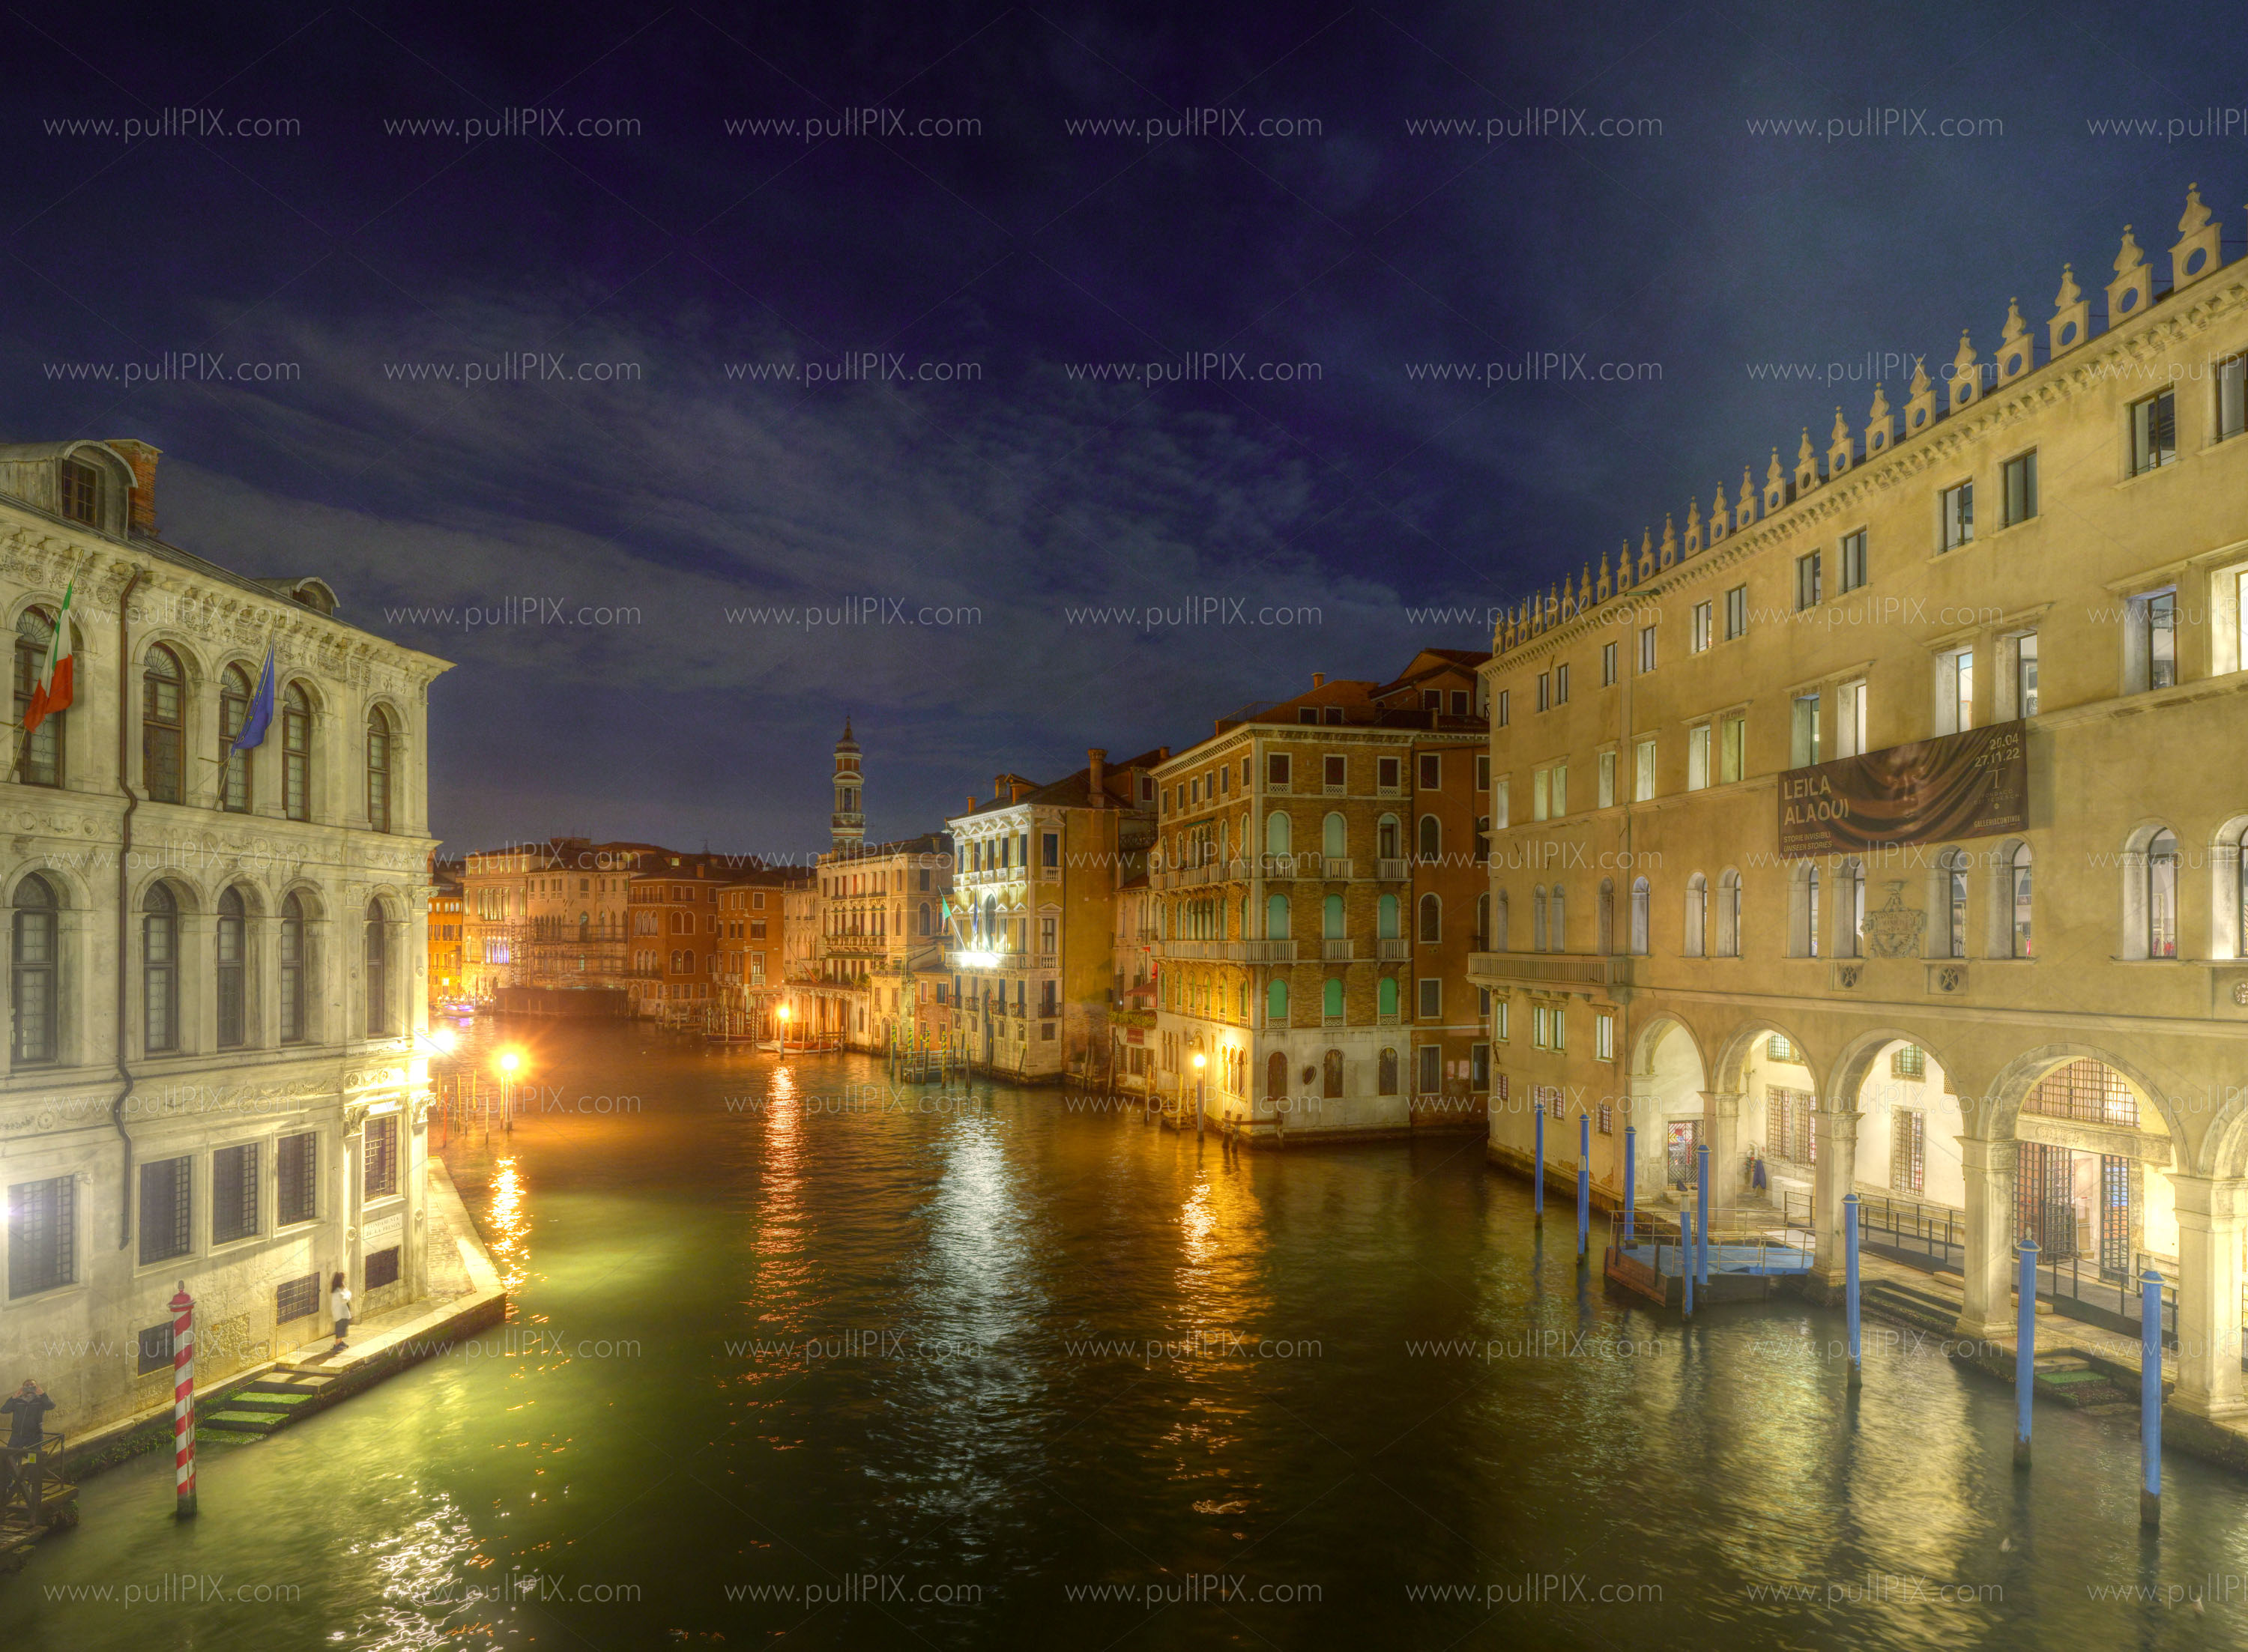 Preview Canale Grande HD1.jpg